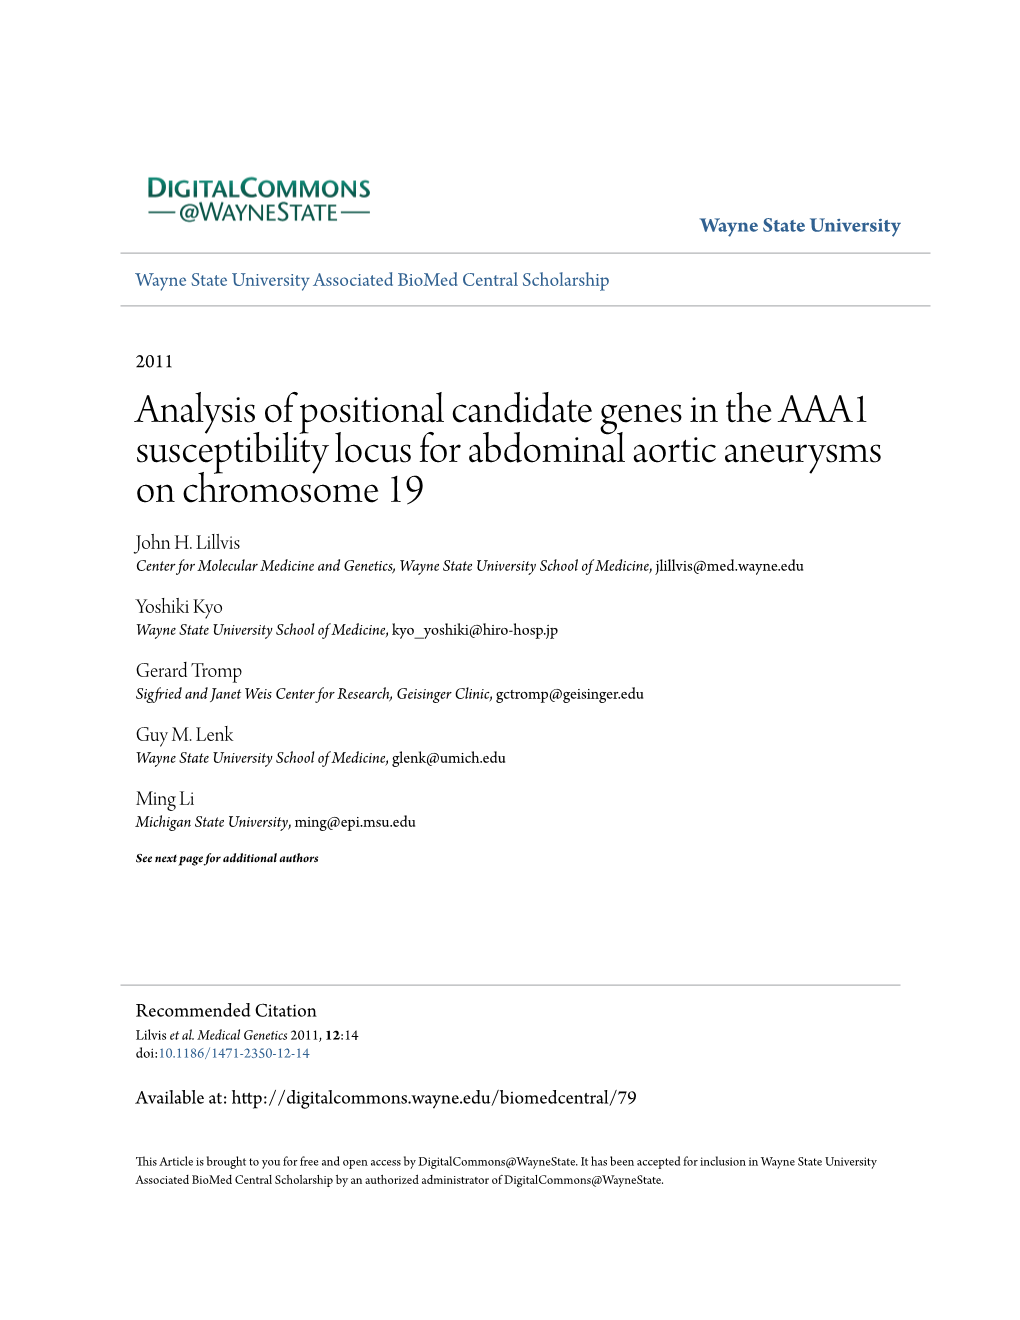 Analysis of Positional Candidate Genes in the AAA1 Susceptibility Locus for Abdominal Aortic Aneurysms on Chromosome 19 John H